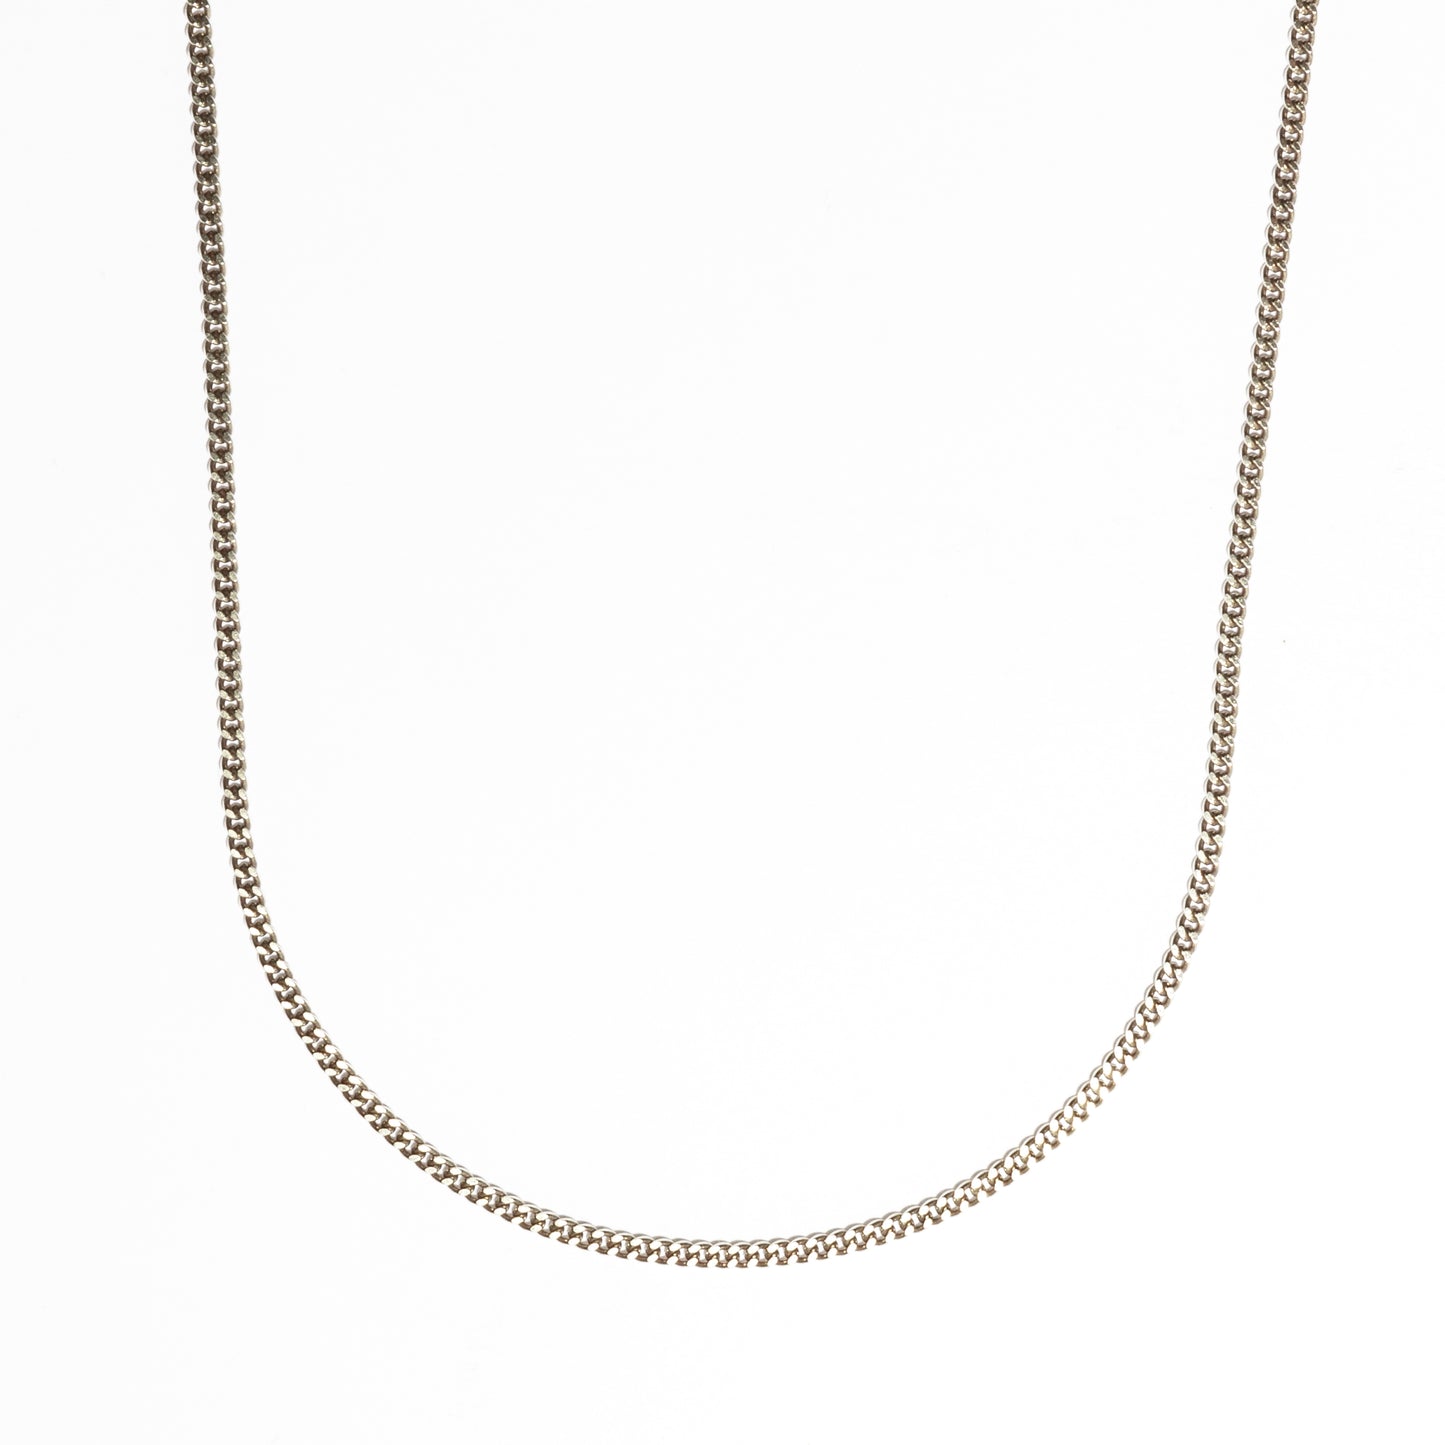 Dainty Layering Necklace, Thin Gold Chain, Sterling Silver, Rose Gold Fill,  14k Gold Fill Chain, Choker Chain, Delicate Thin Chain Necklace - Etsy